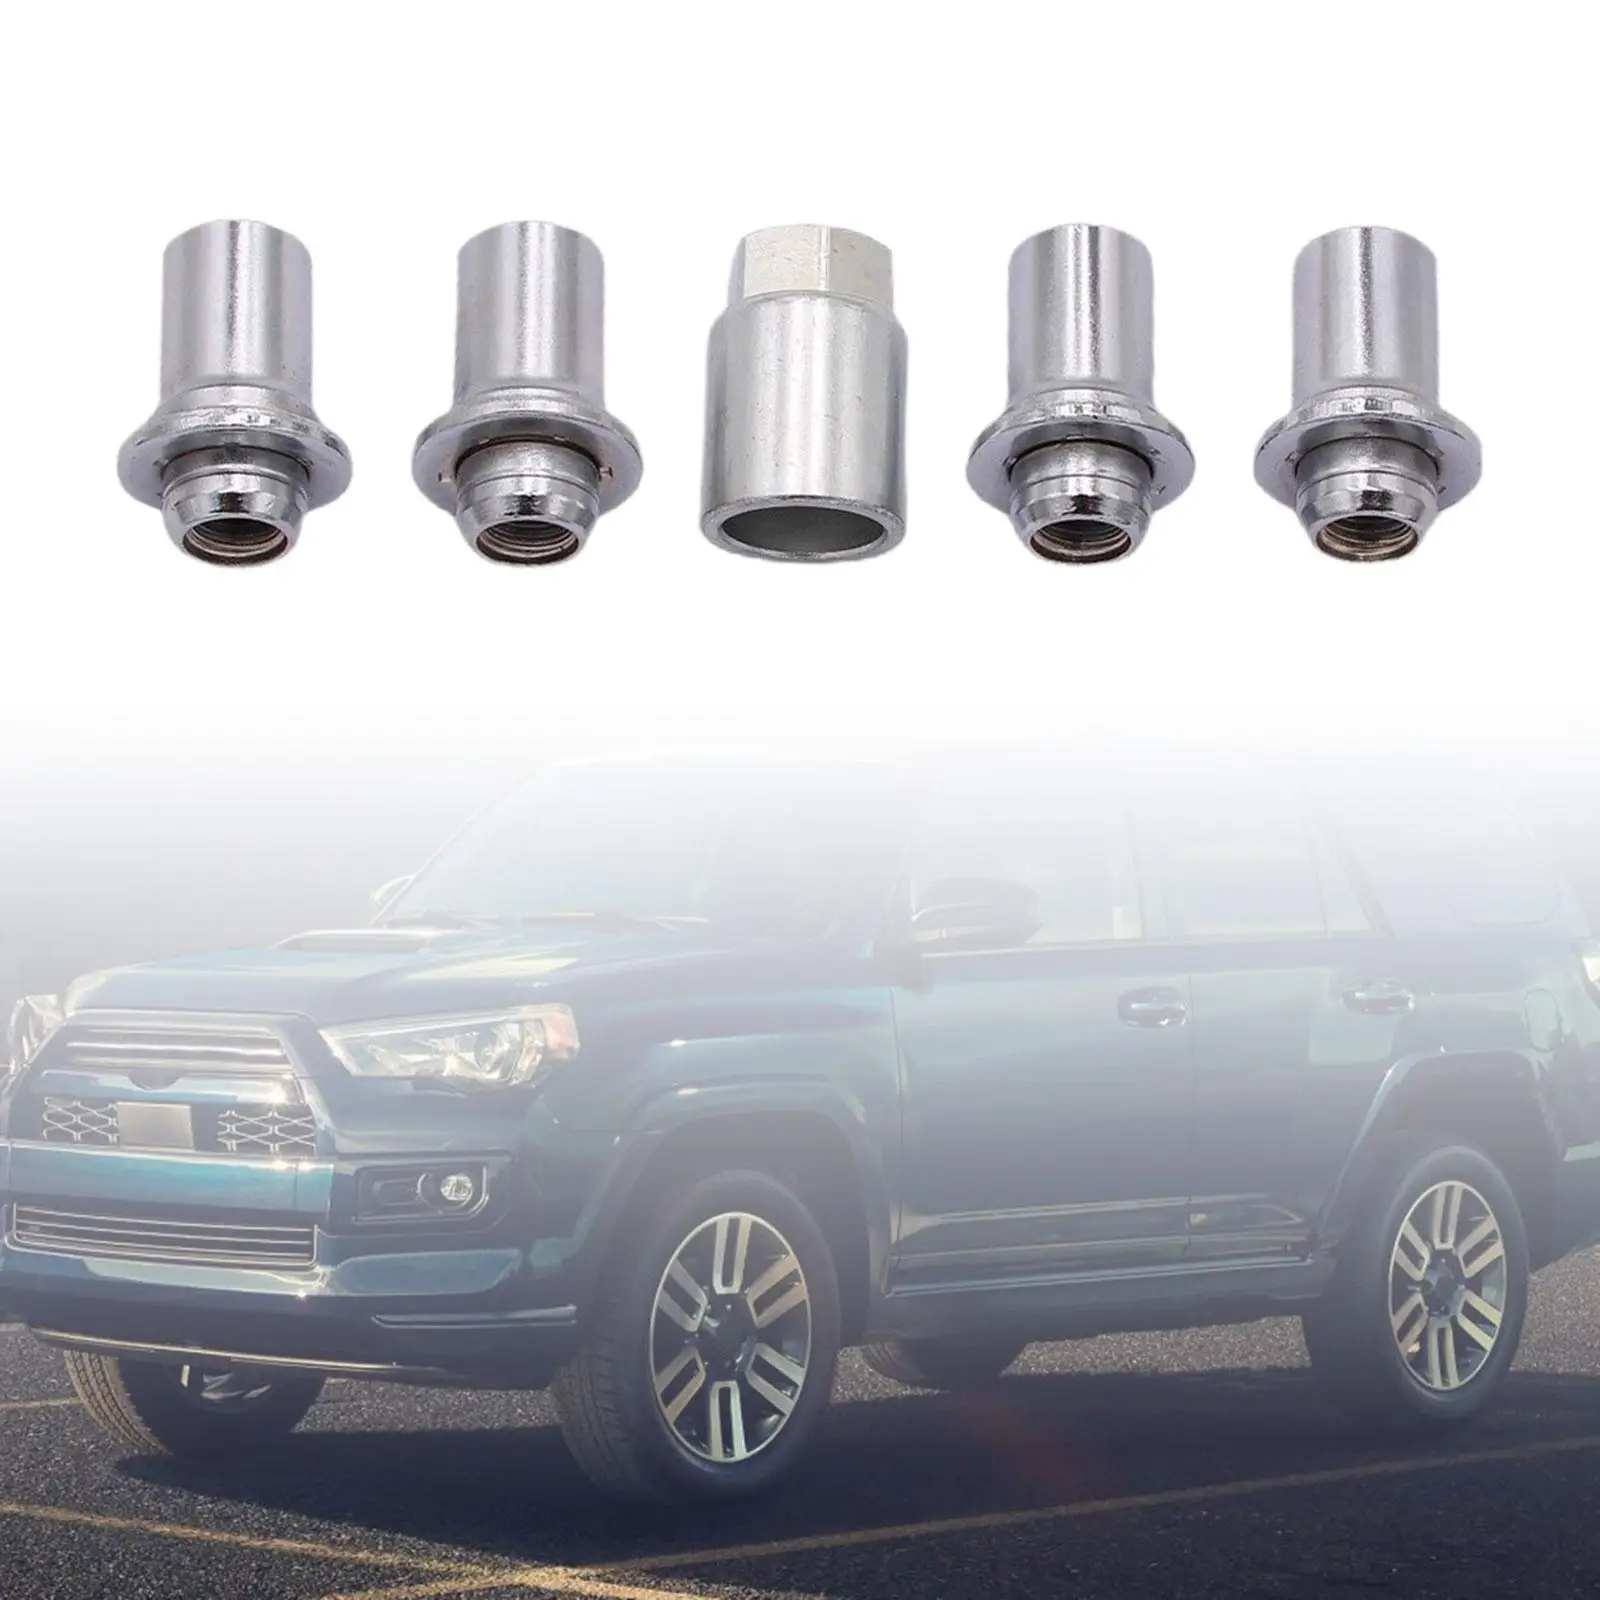 Alloy Wheel Lock Set 00276-00901 Replaces Durable for 4Runner